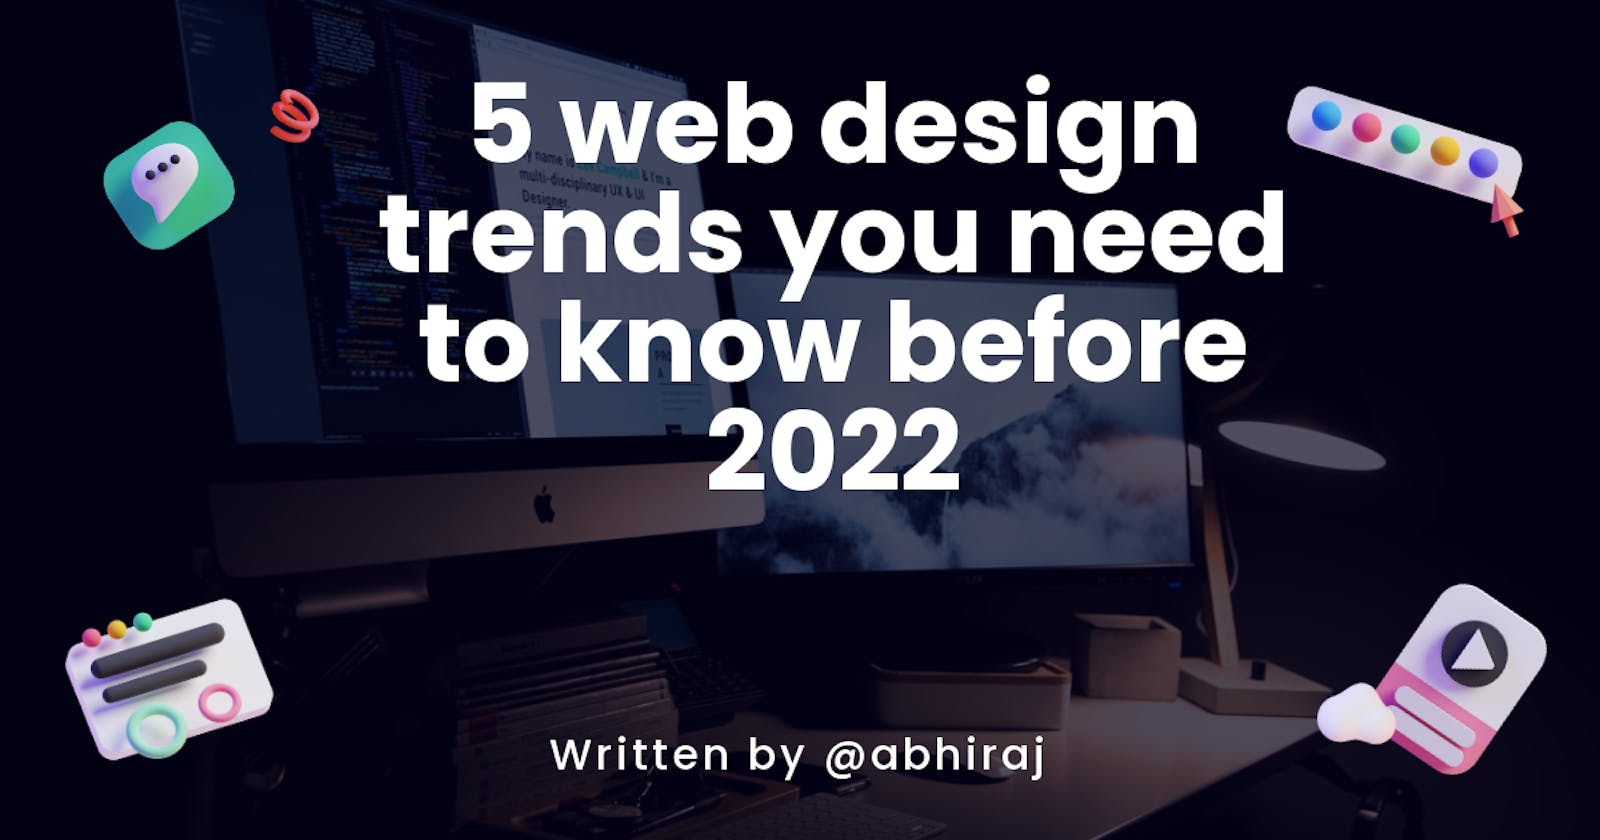 5 web design trends you need to know before 2022